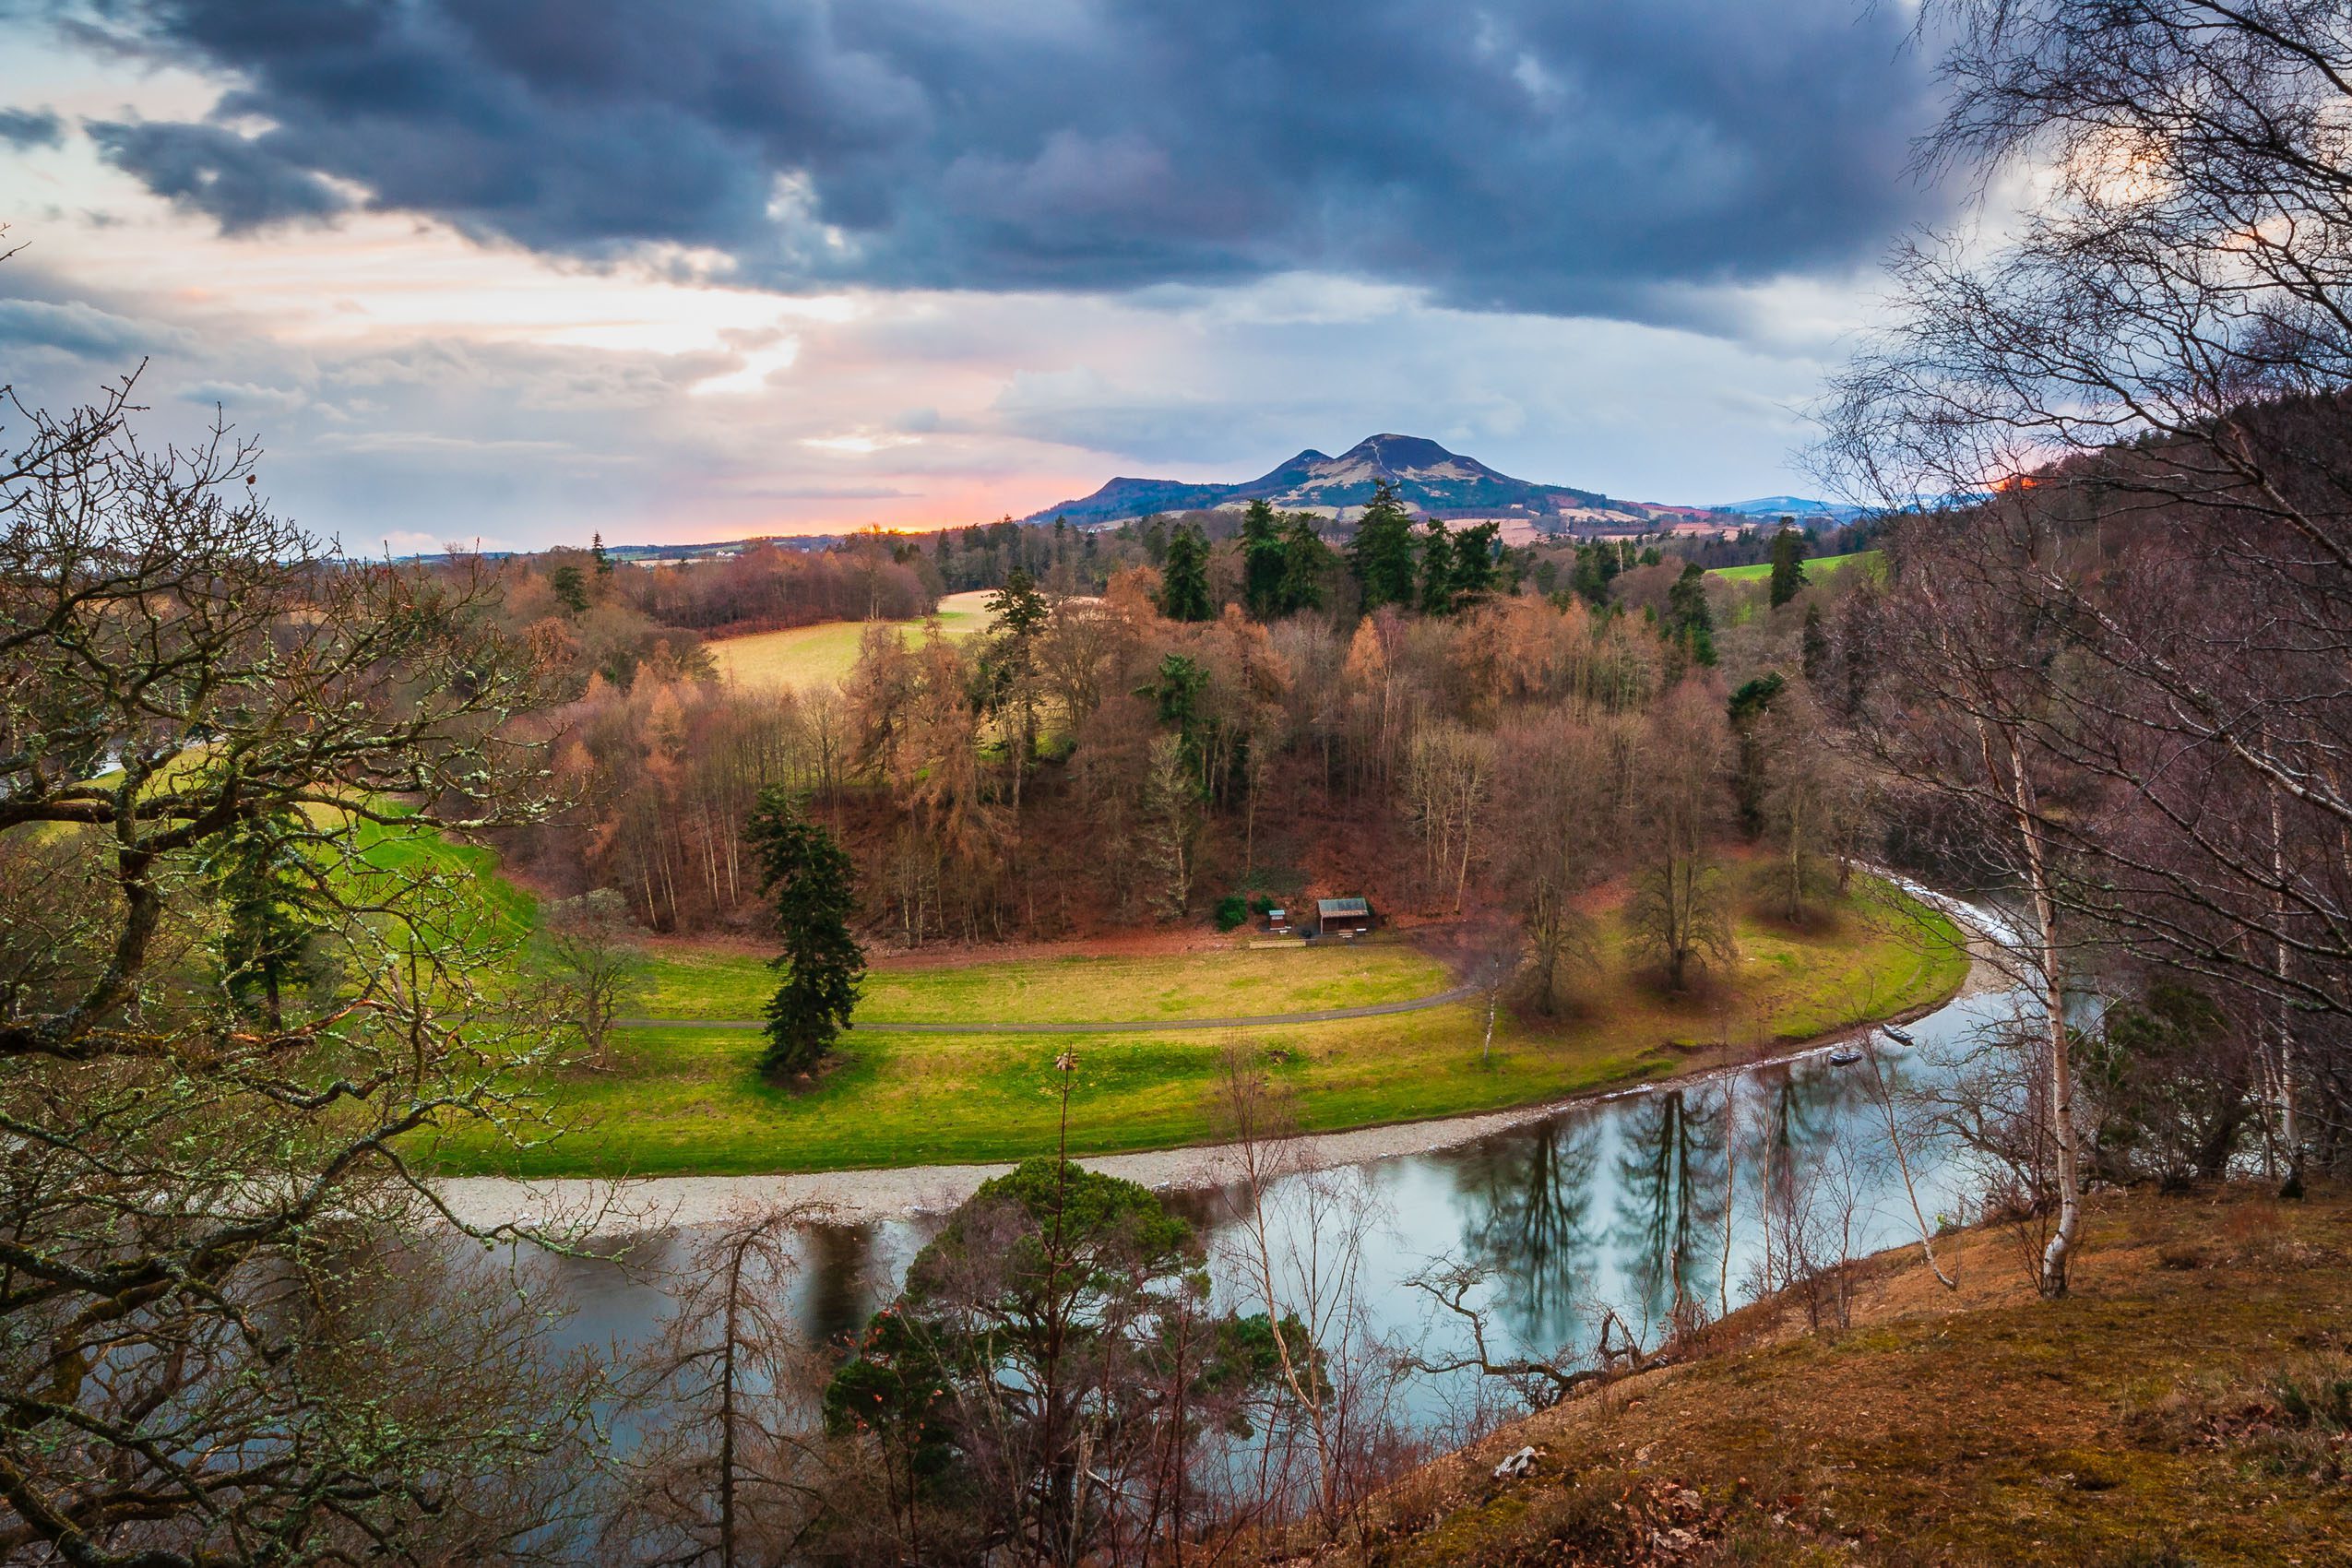 The River Tweed and the Eildon Hills from Scott's View, The Borders, Scotland. BD005